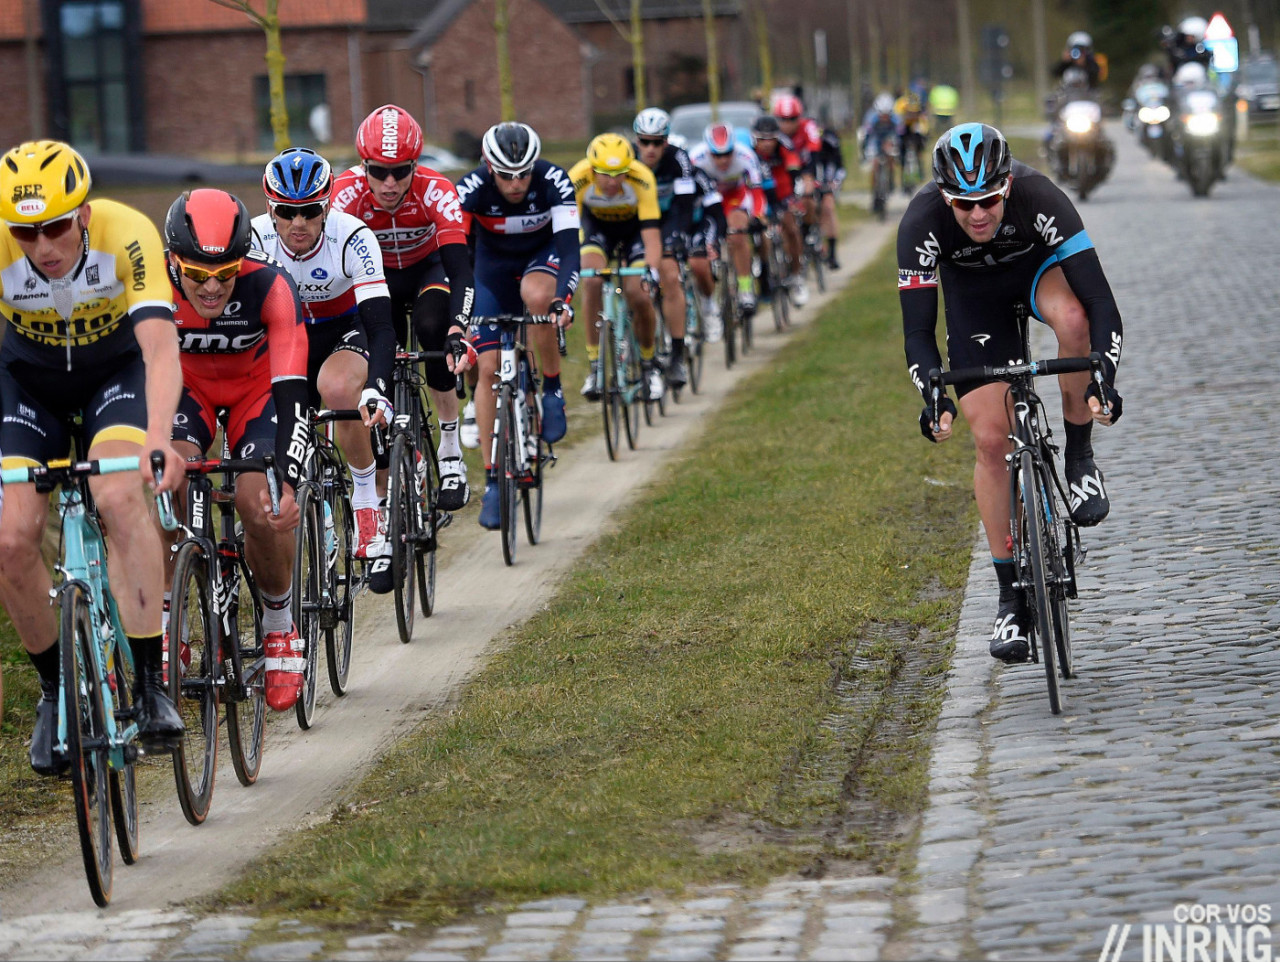 Photo: If a race organiser picks a cobbled road it’s because they want to soften up the riders in the same way a cook softens a steak with a meat tenderiser. 